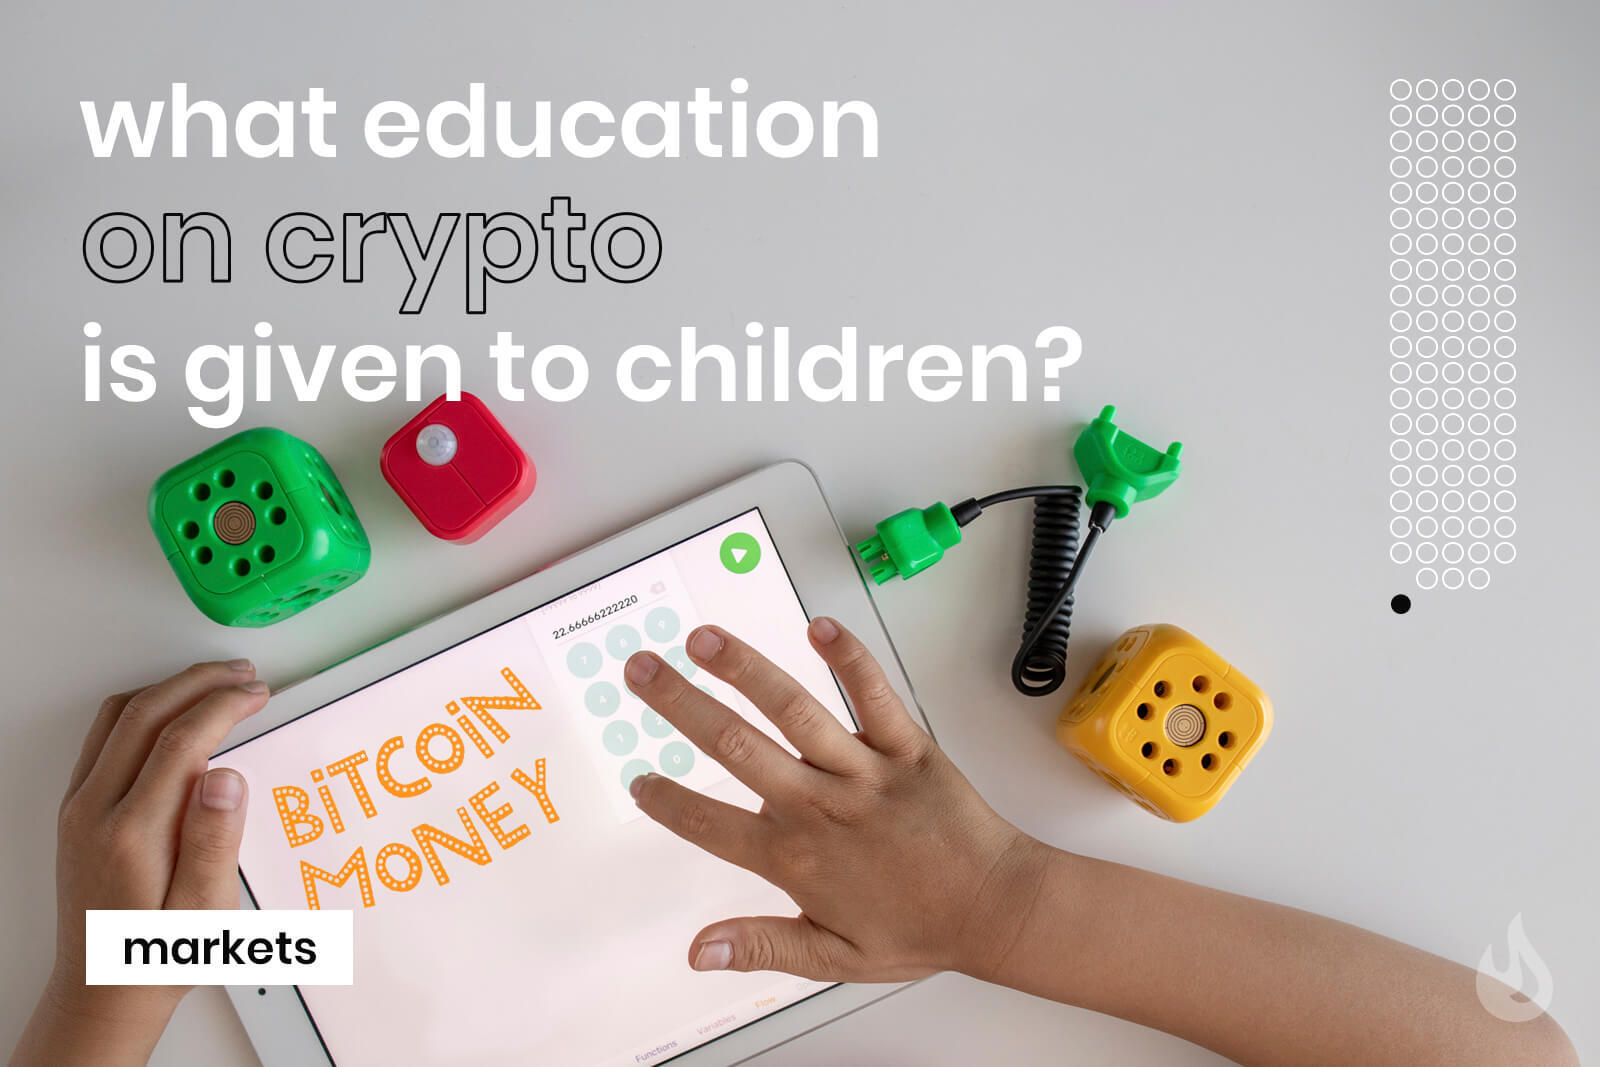 education on crypto for children